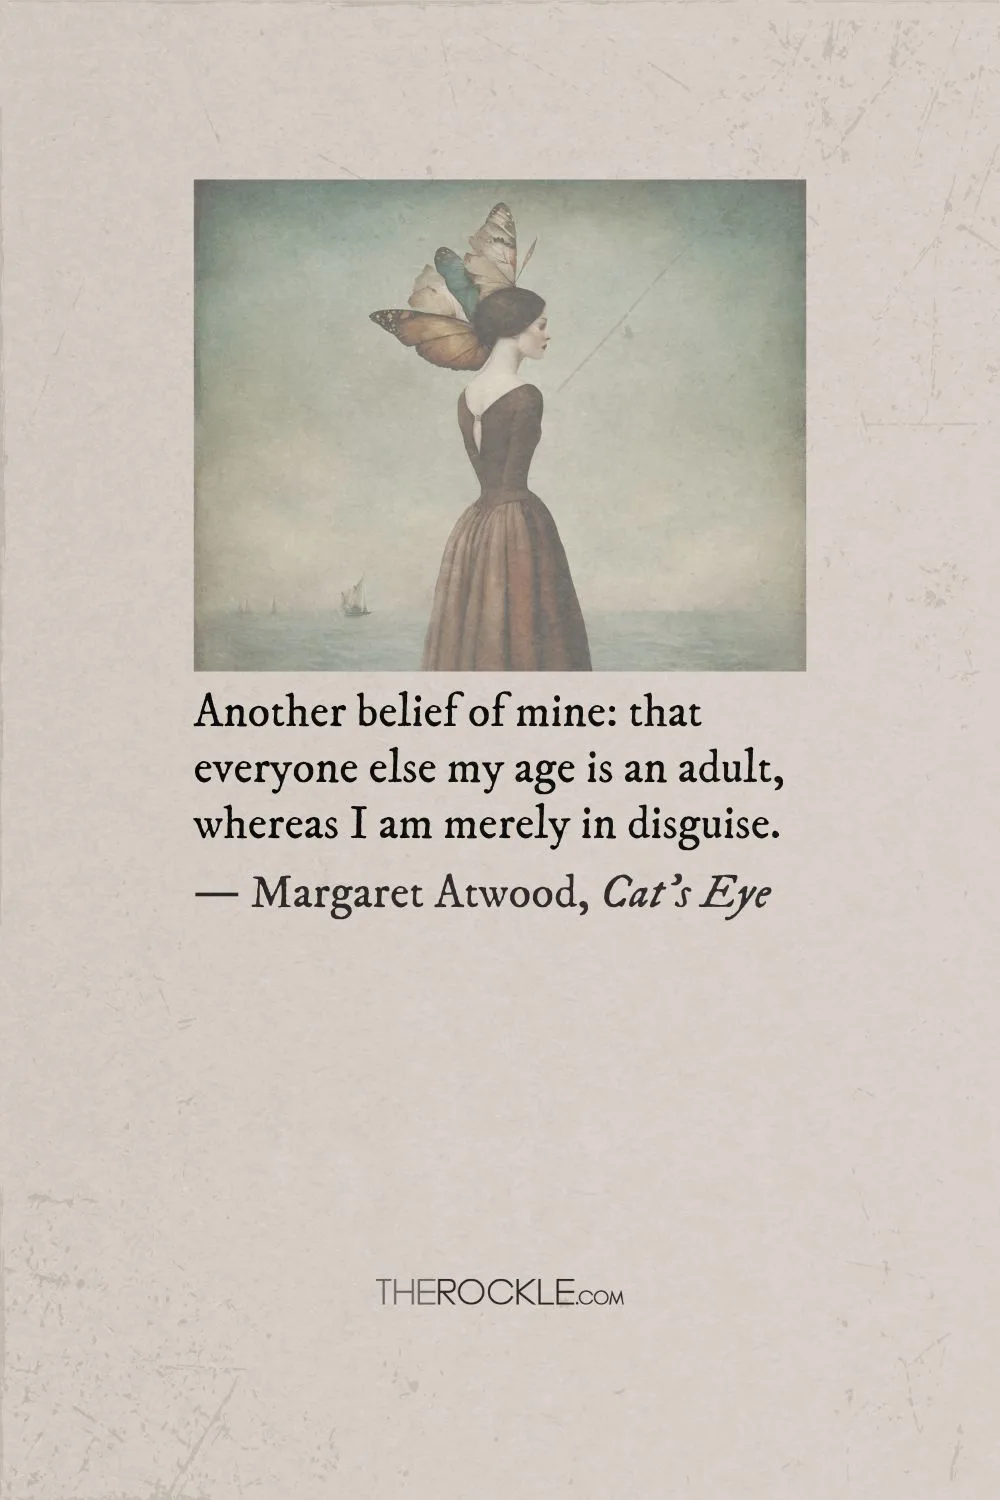 Margaret Atwood's quote about adulthood